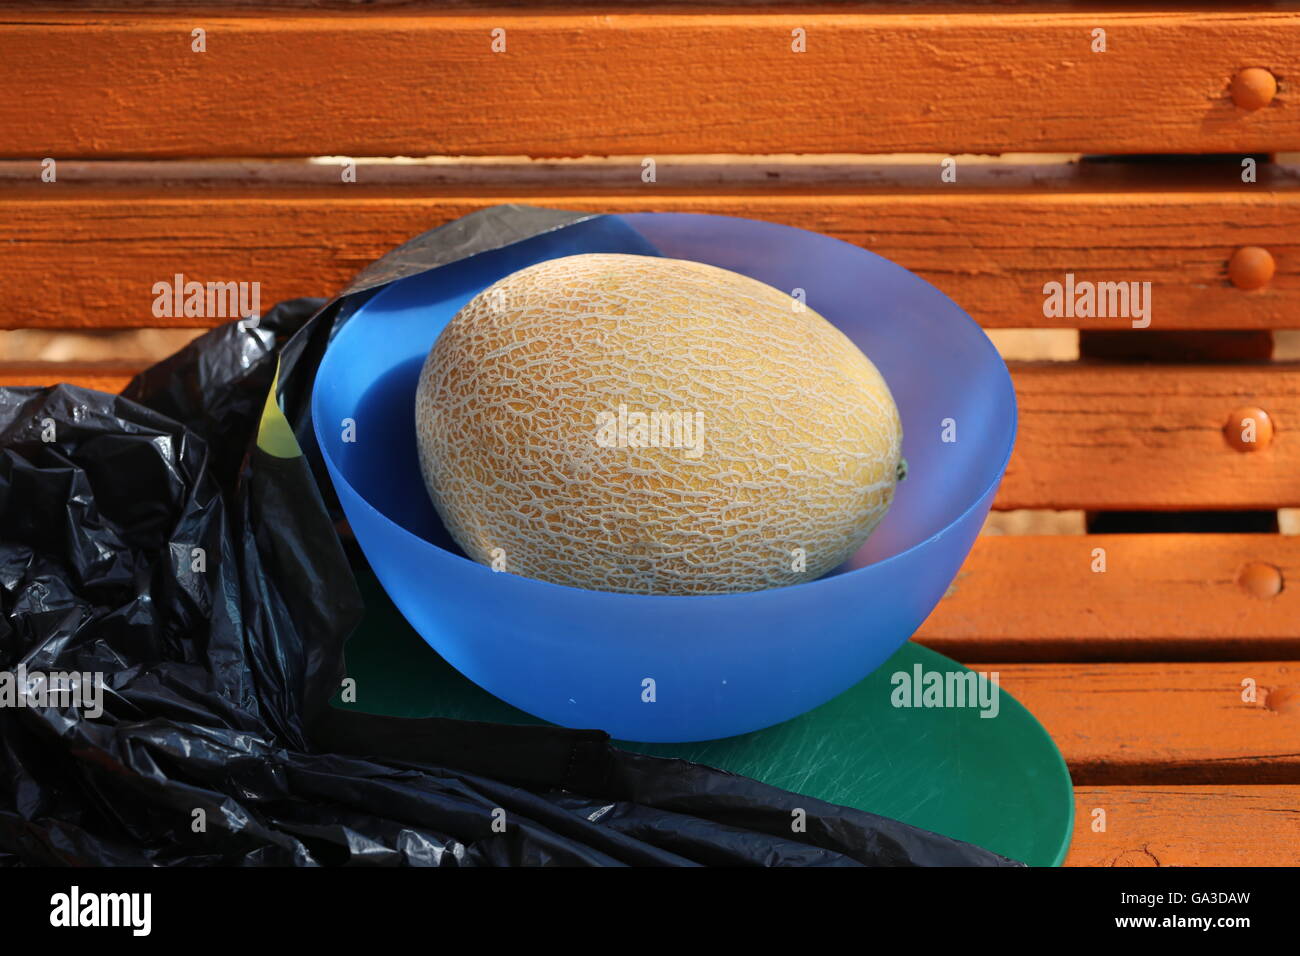 Unpeeled Melon Fruit in a Blue Plastic Bowl Stock Photo